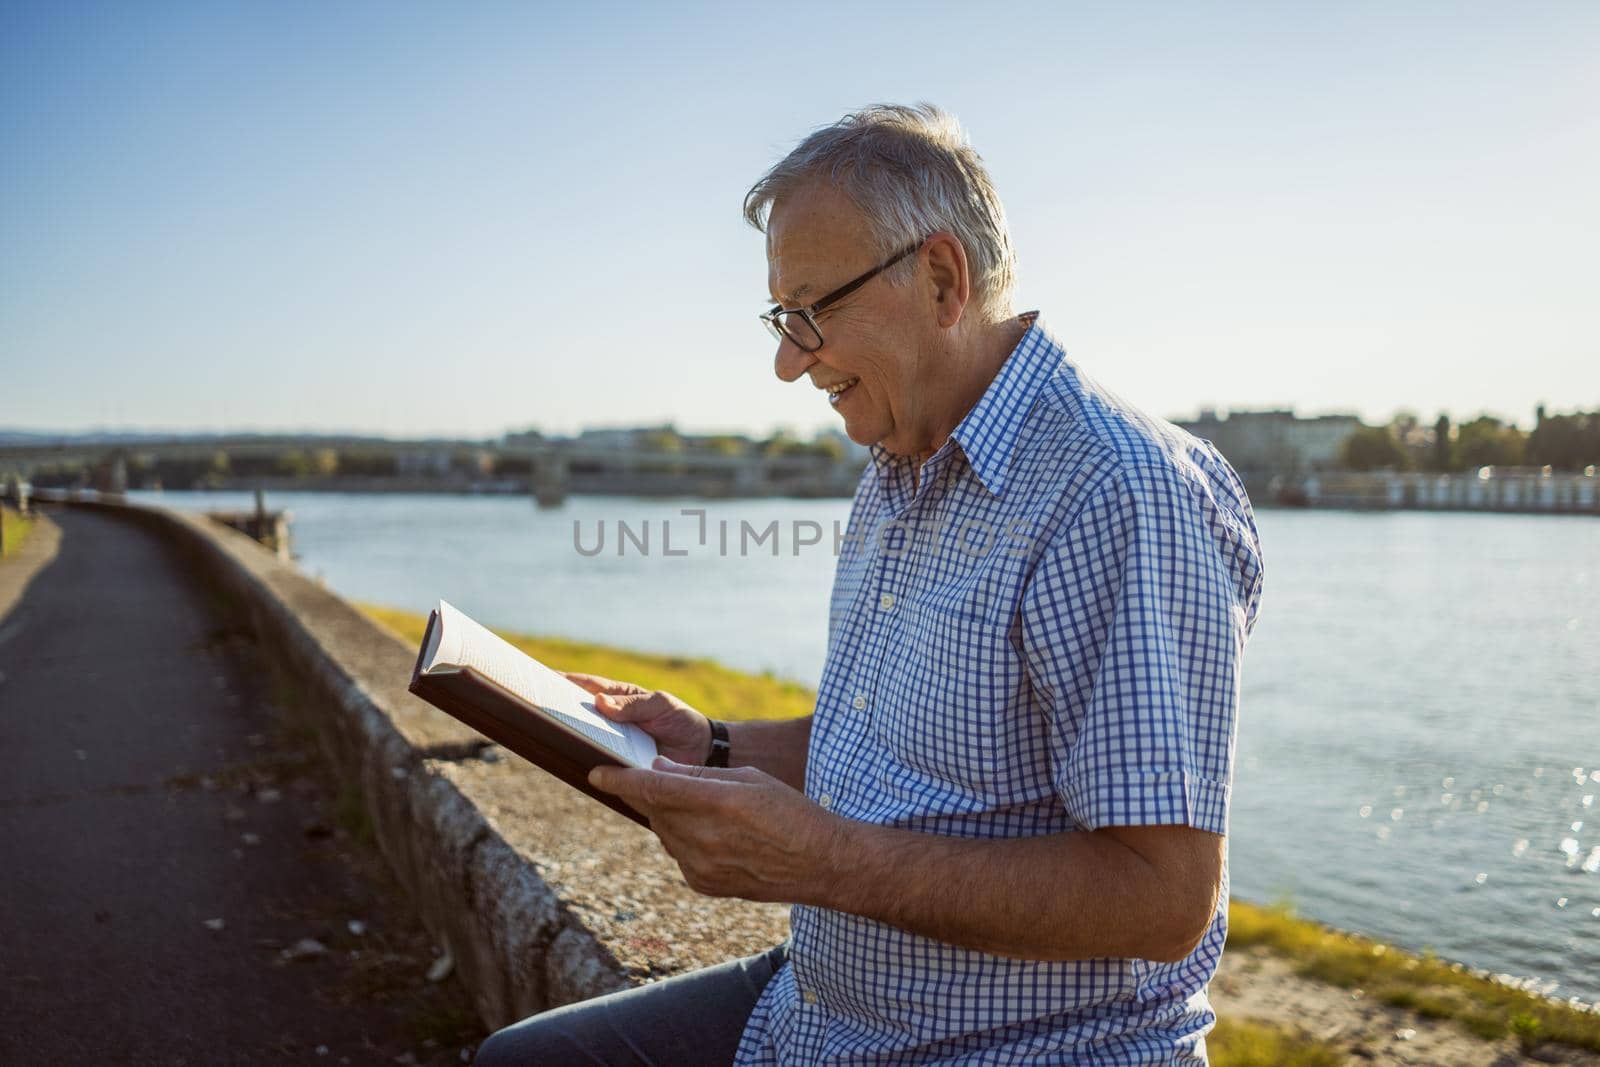 Outdoor portrait of senior man who is reading a book.